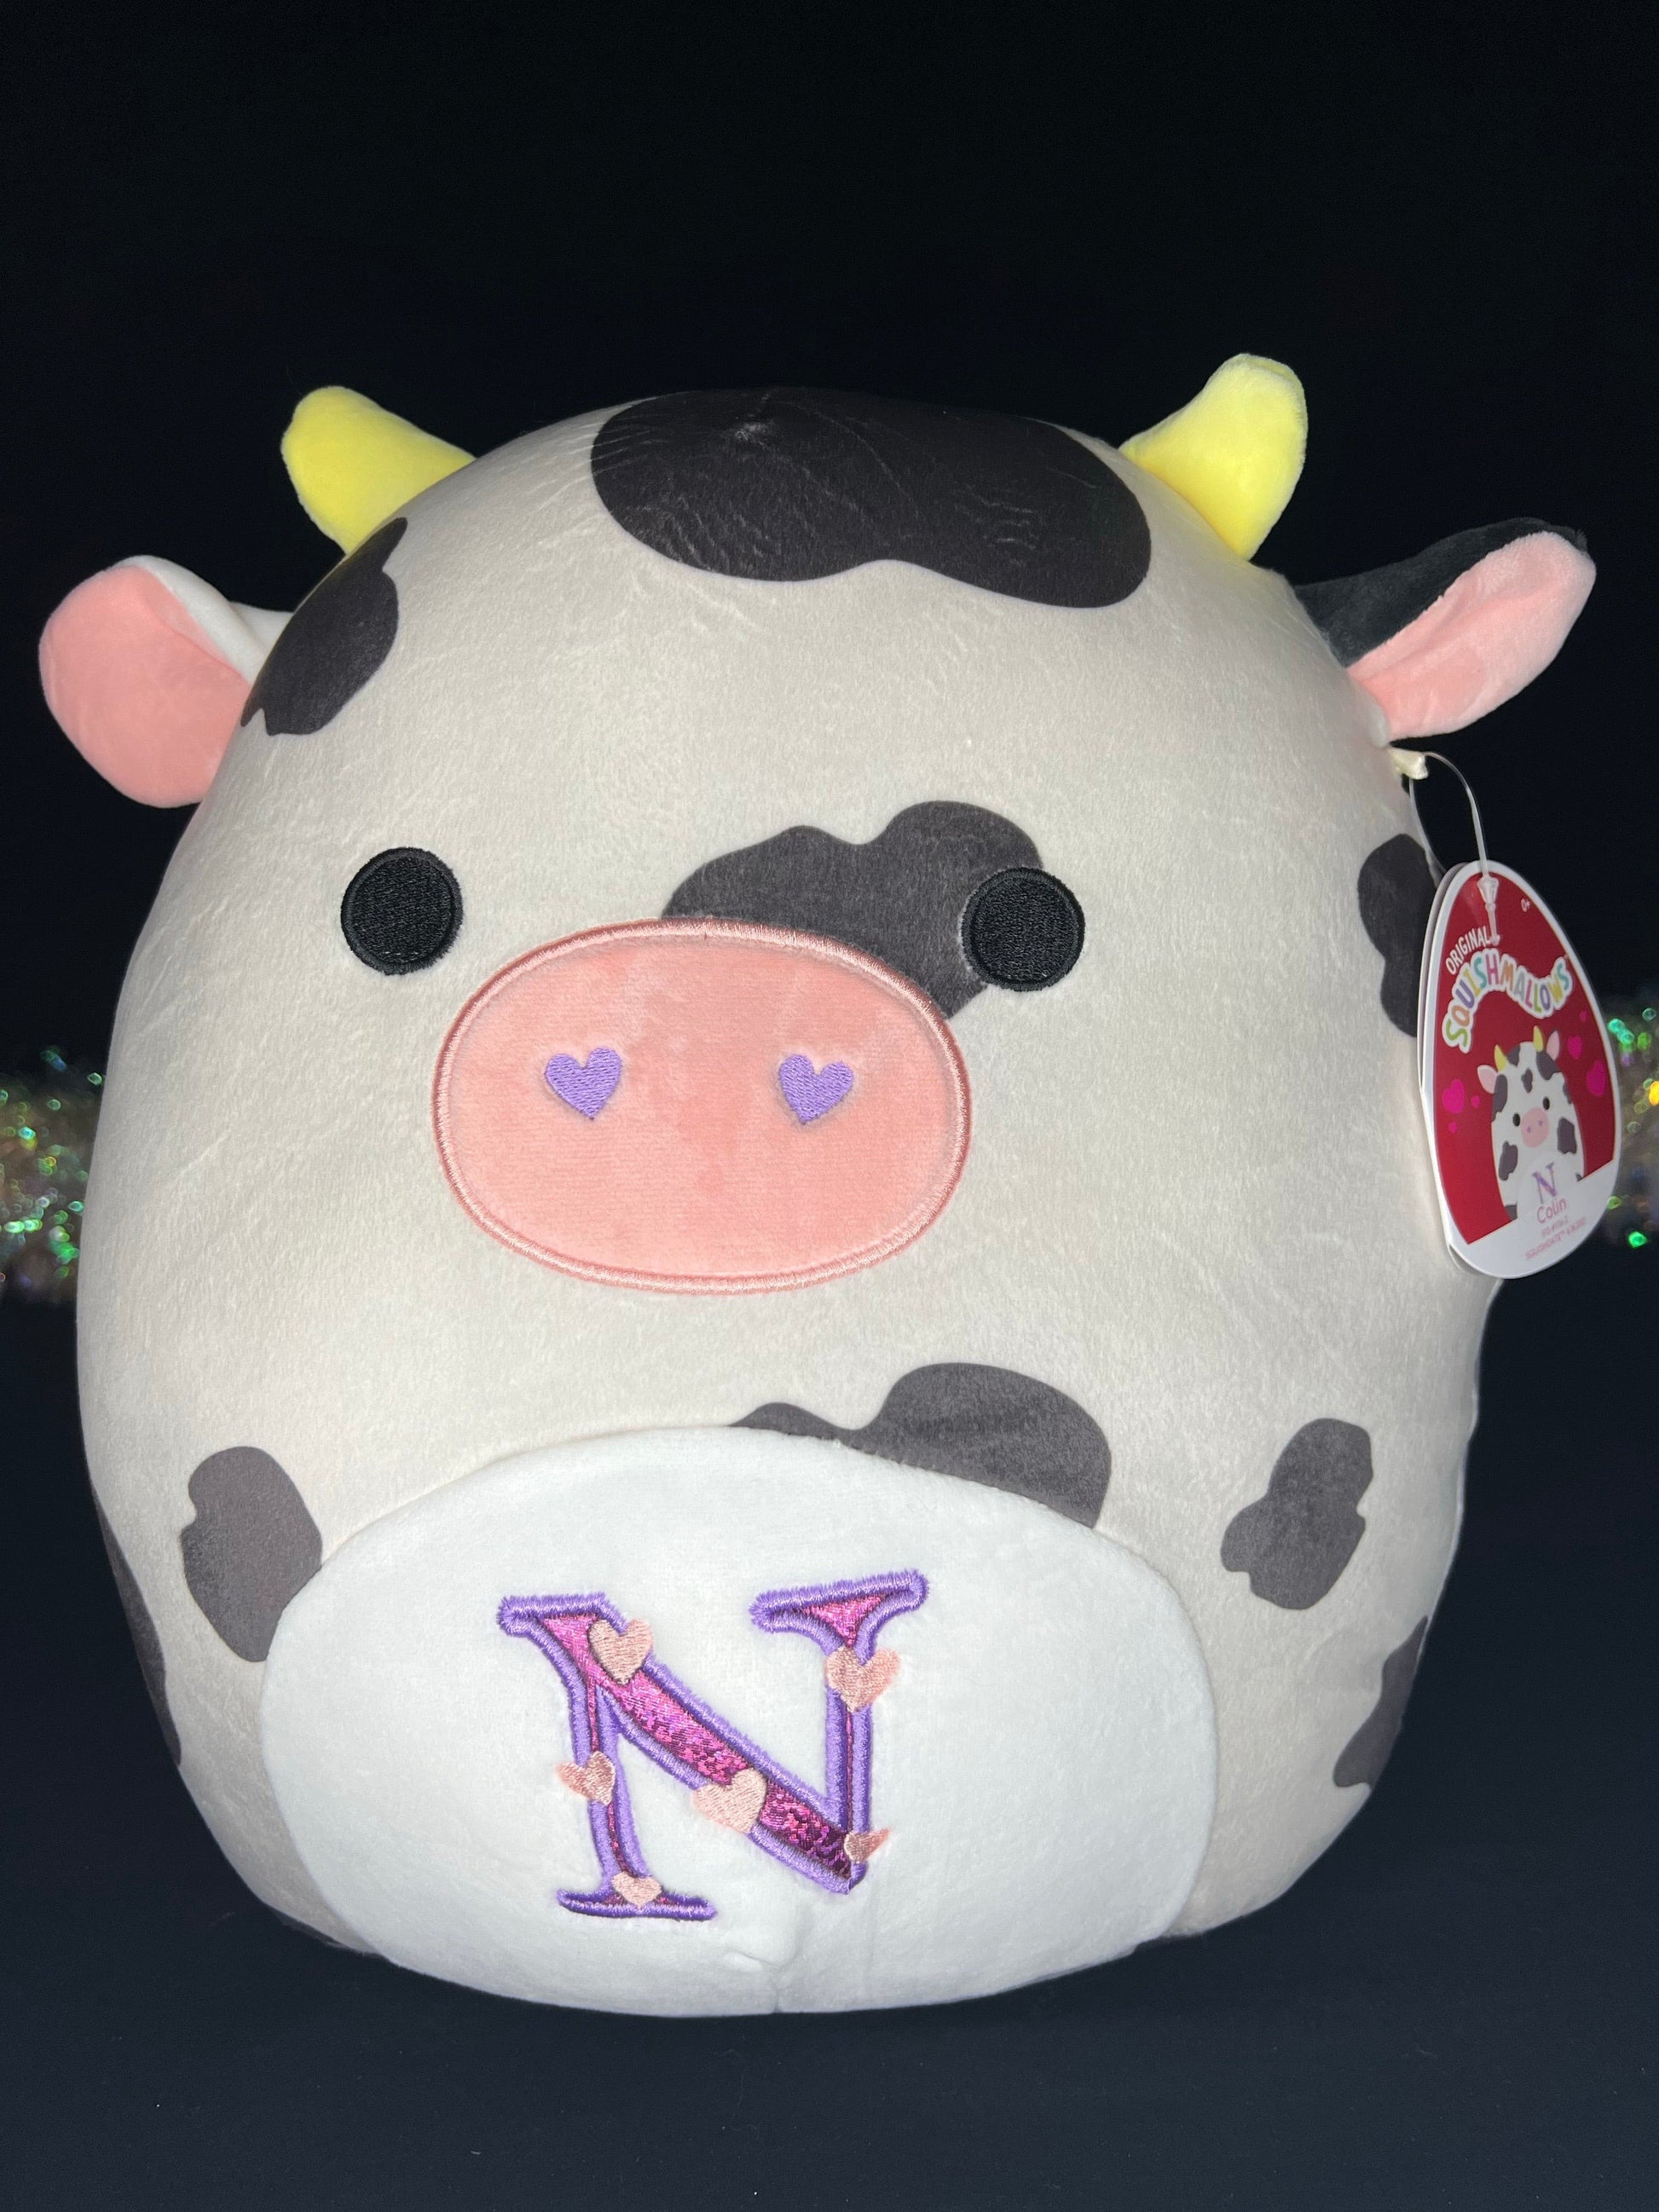 Squishmallow 12” Colin the Cow “Letter N” Plush | Sweet Magnolia Charms.